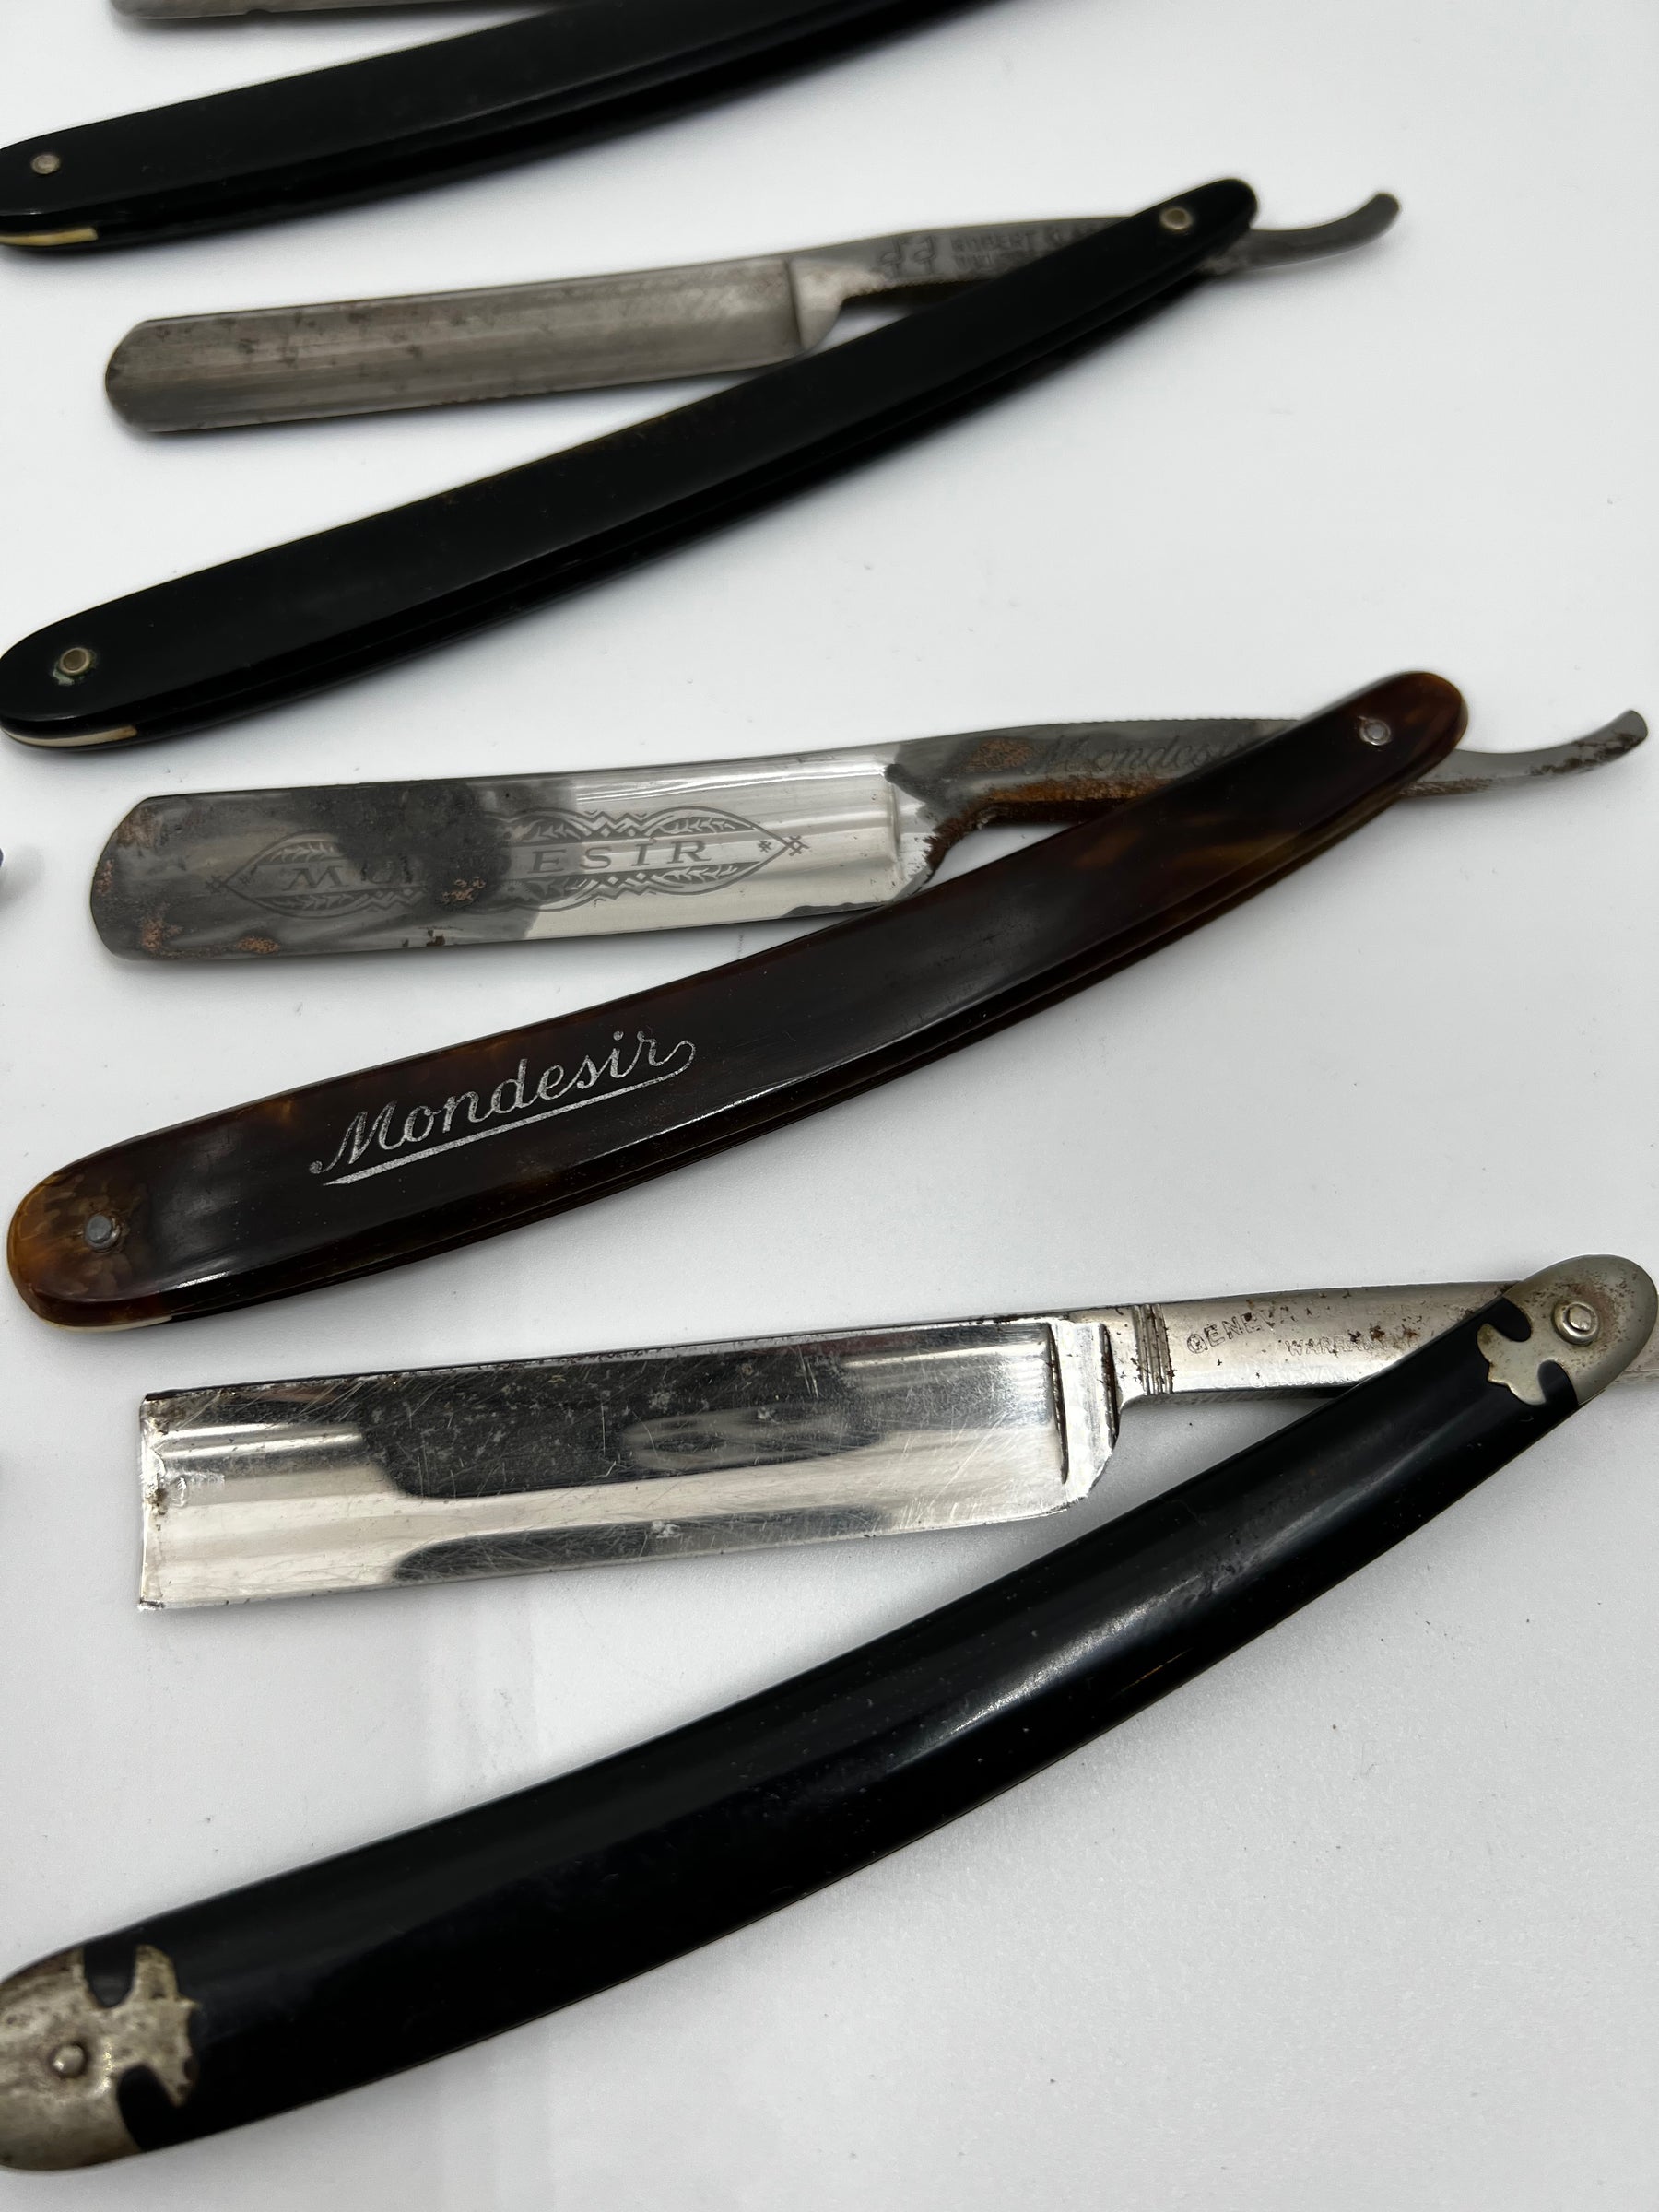 Vintage 10 Straight Razor Lot #23 - May Contain Sheffield, Solingen, Japanese & USA makers, as pictured